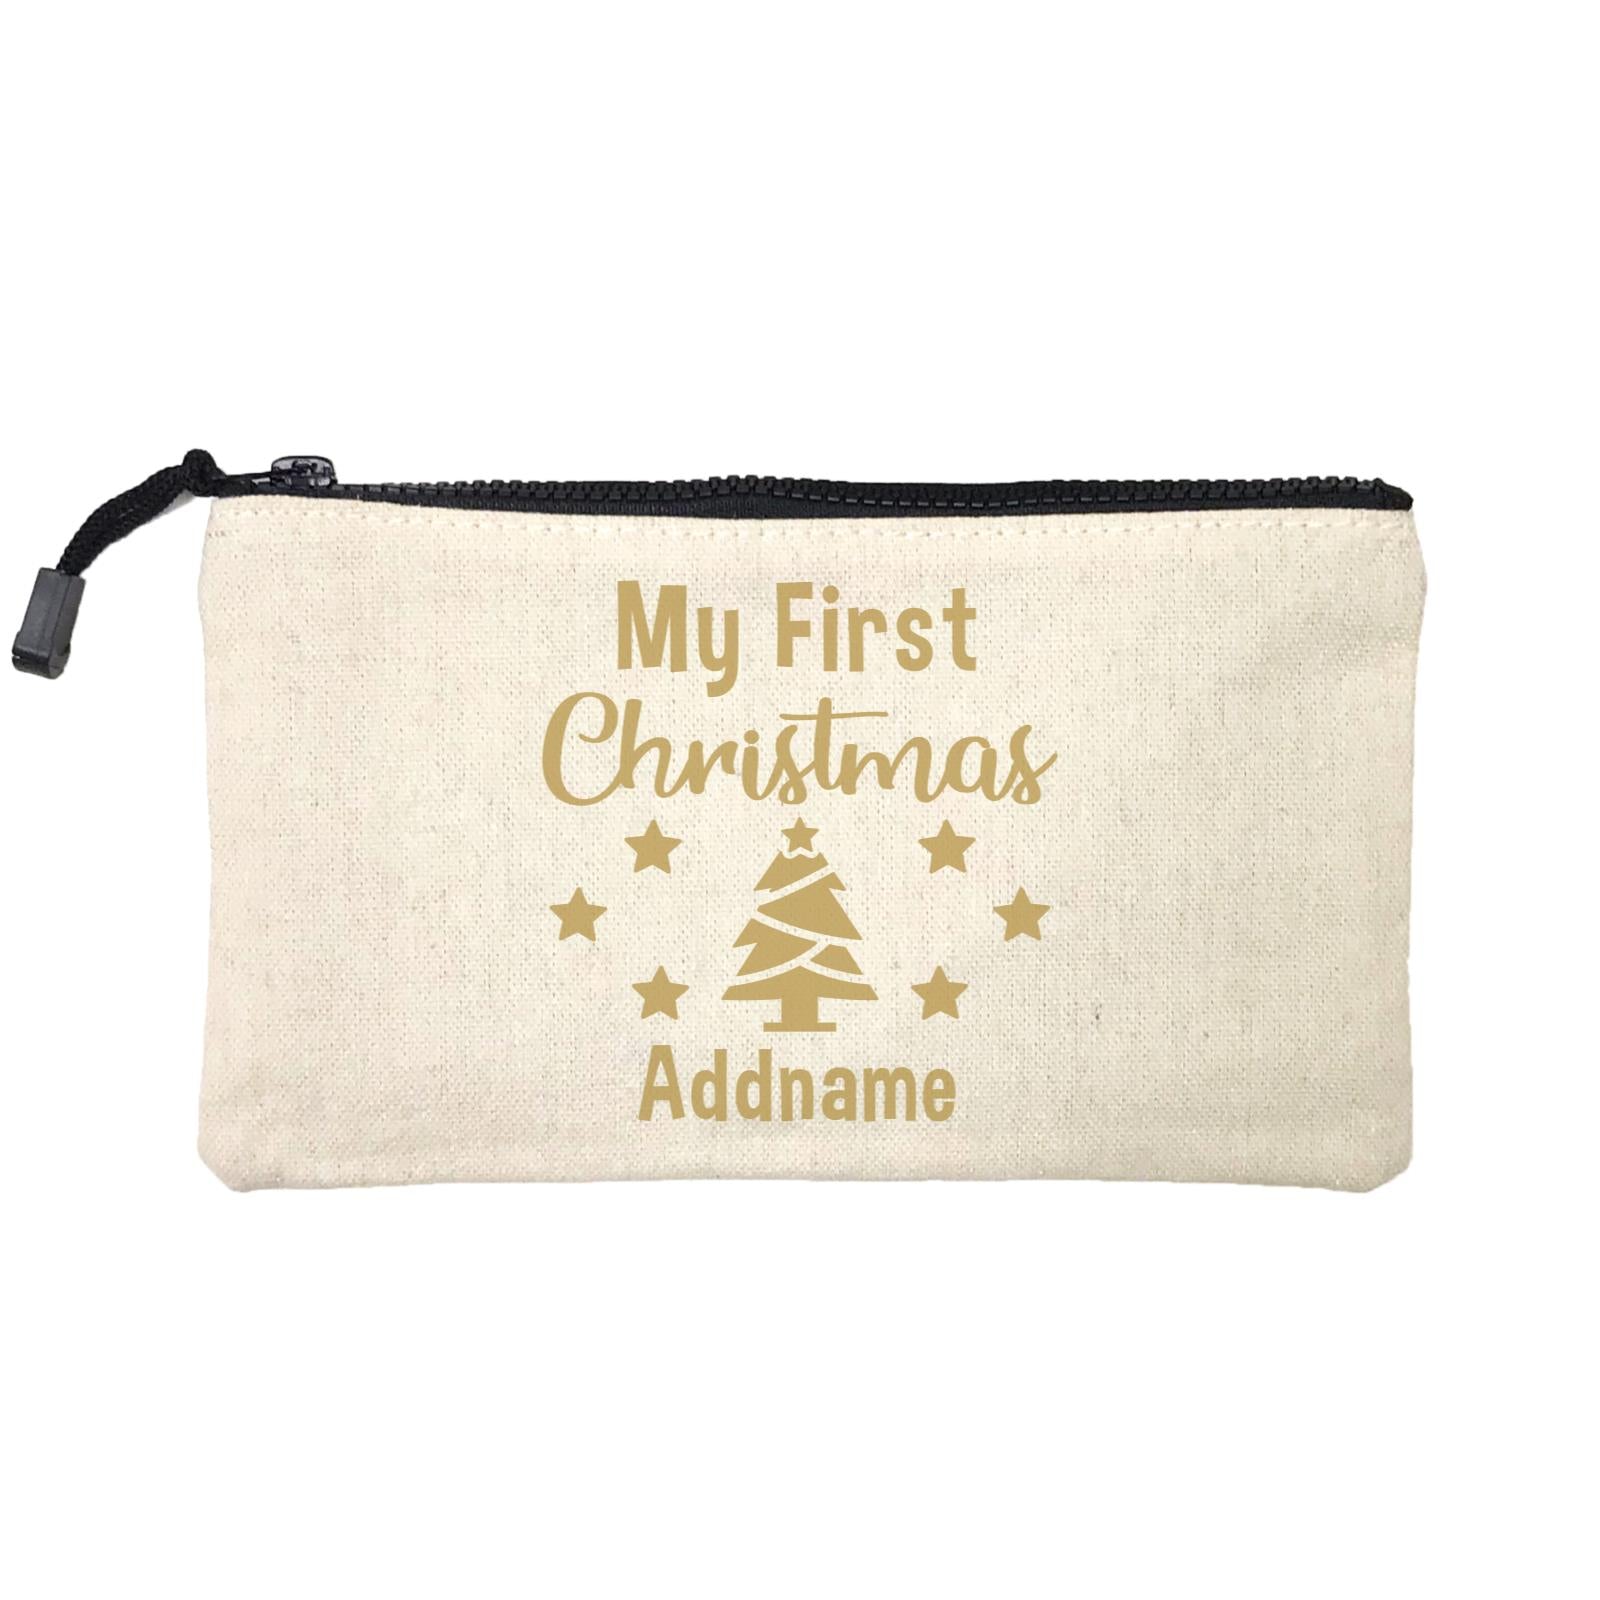 Xmas My First Christmas with Christmas Tree Mini Accessories Stationery Pouch